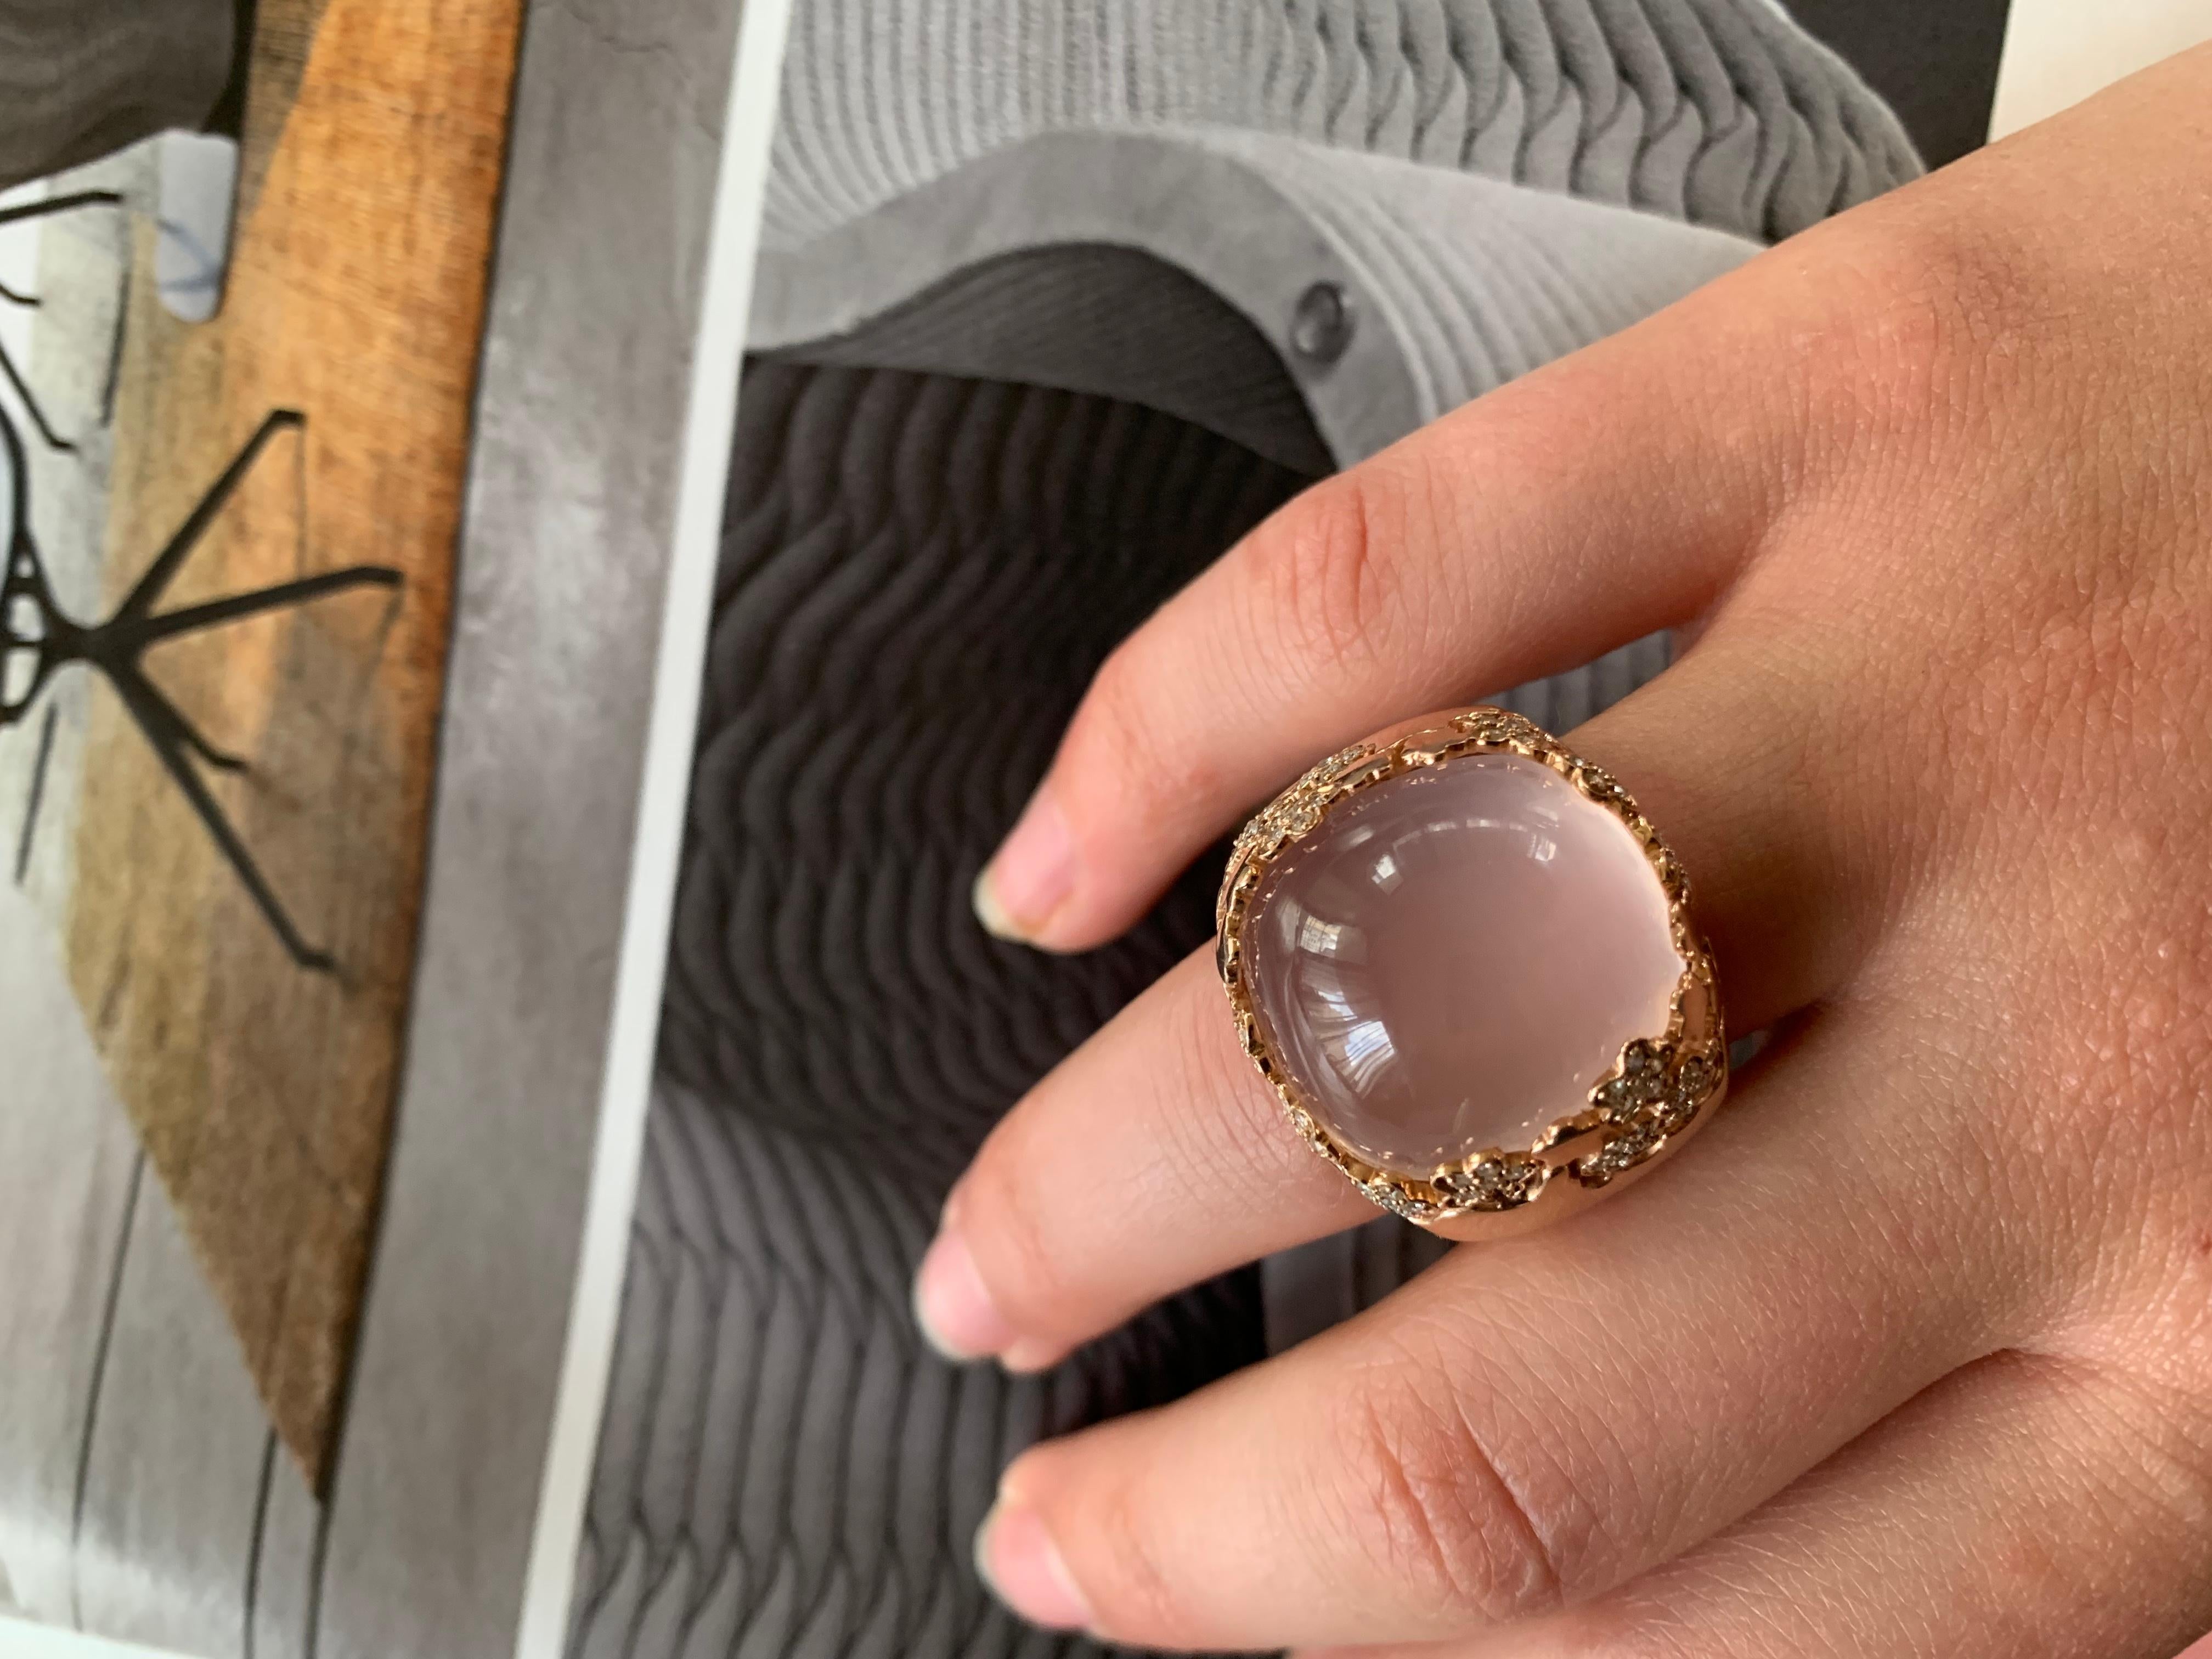 Spectacular 30 carat fine translucent pink Rose Quartz and diamond rose gold Cocktail ring.
Composed of three elements symbolizing Romance- Rose Quartz, Rose Gold and Diamond Rose Flowers.
Superb quality substantial setting with diamond set and